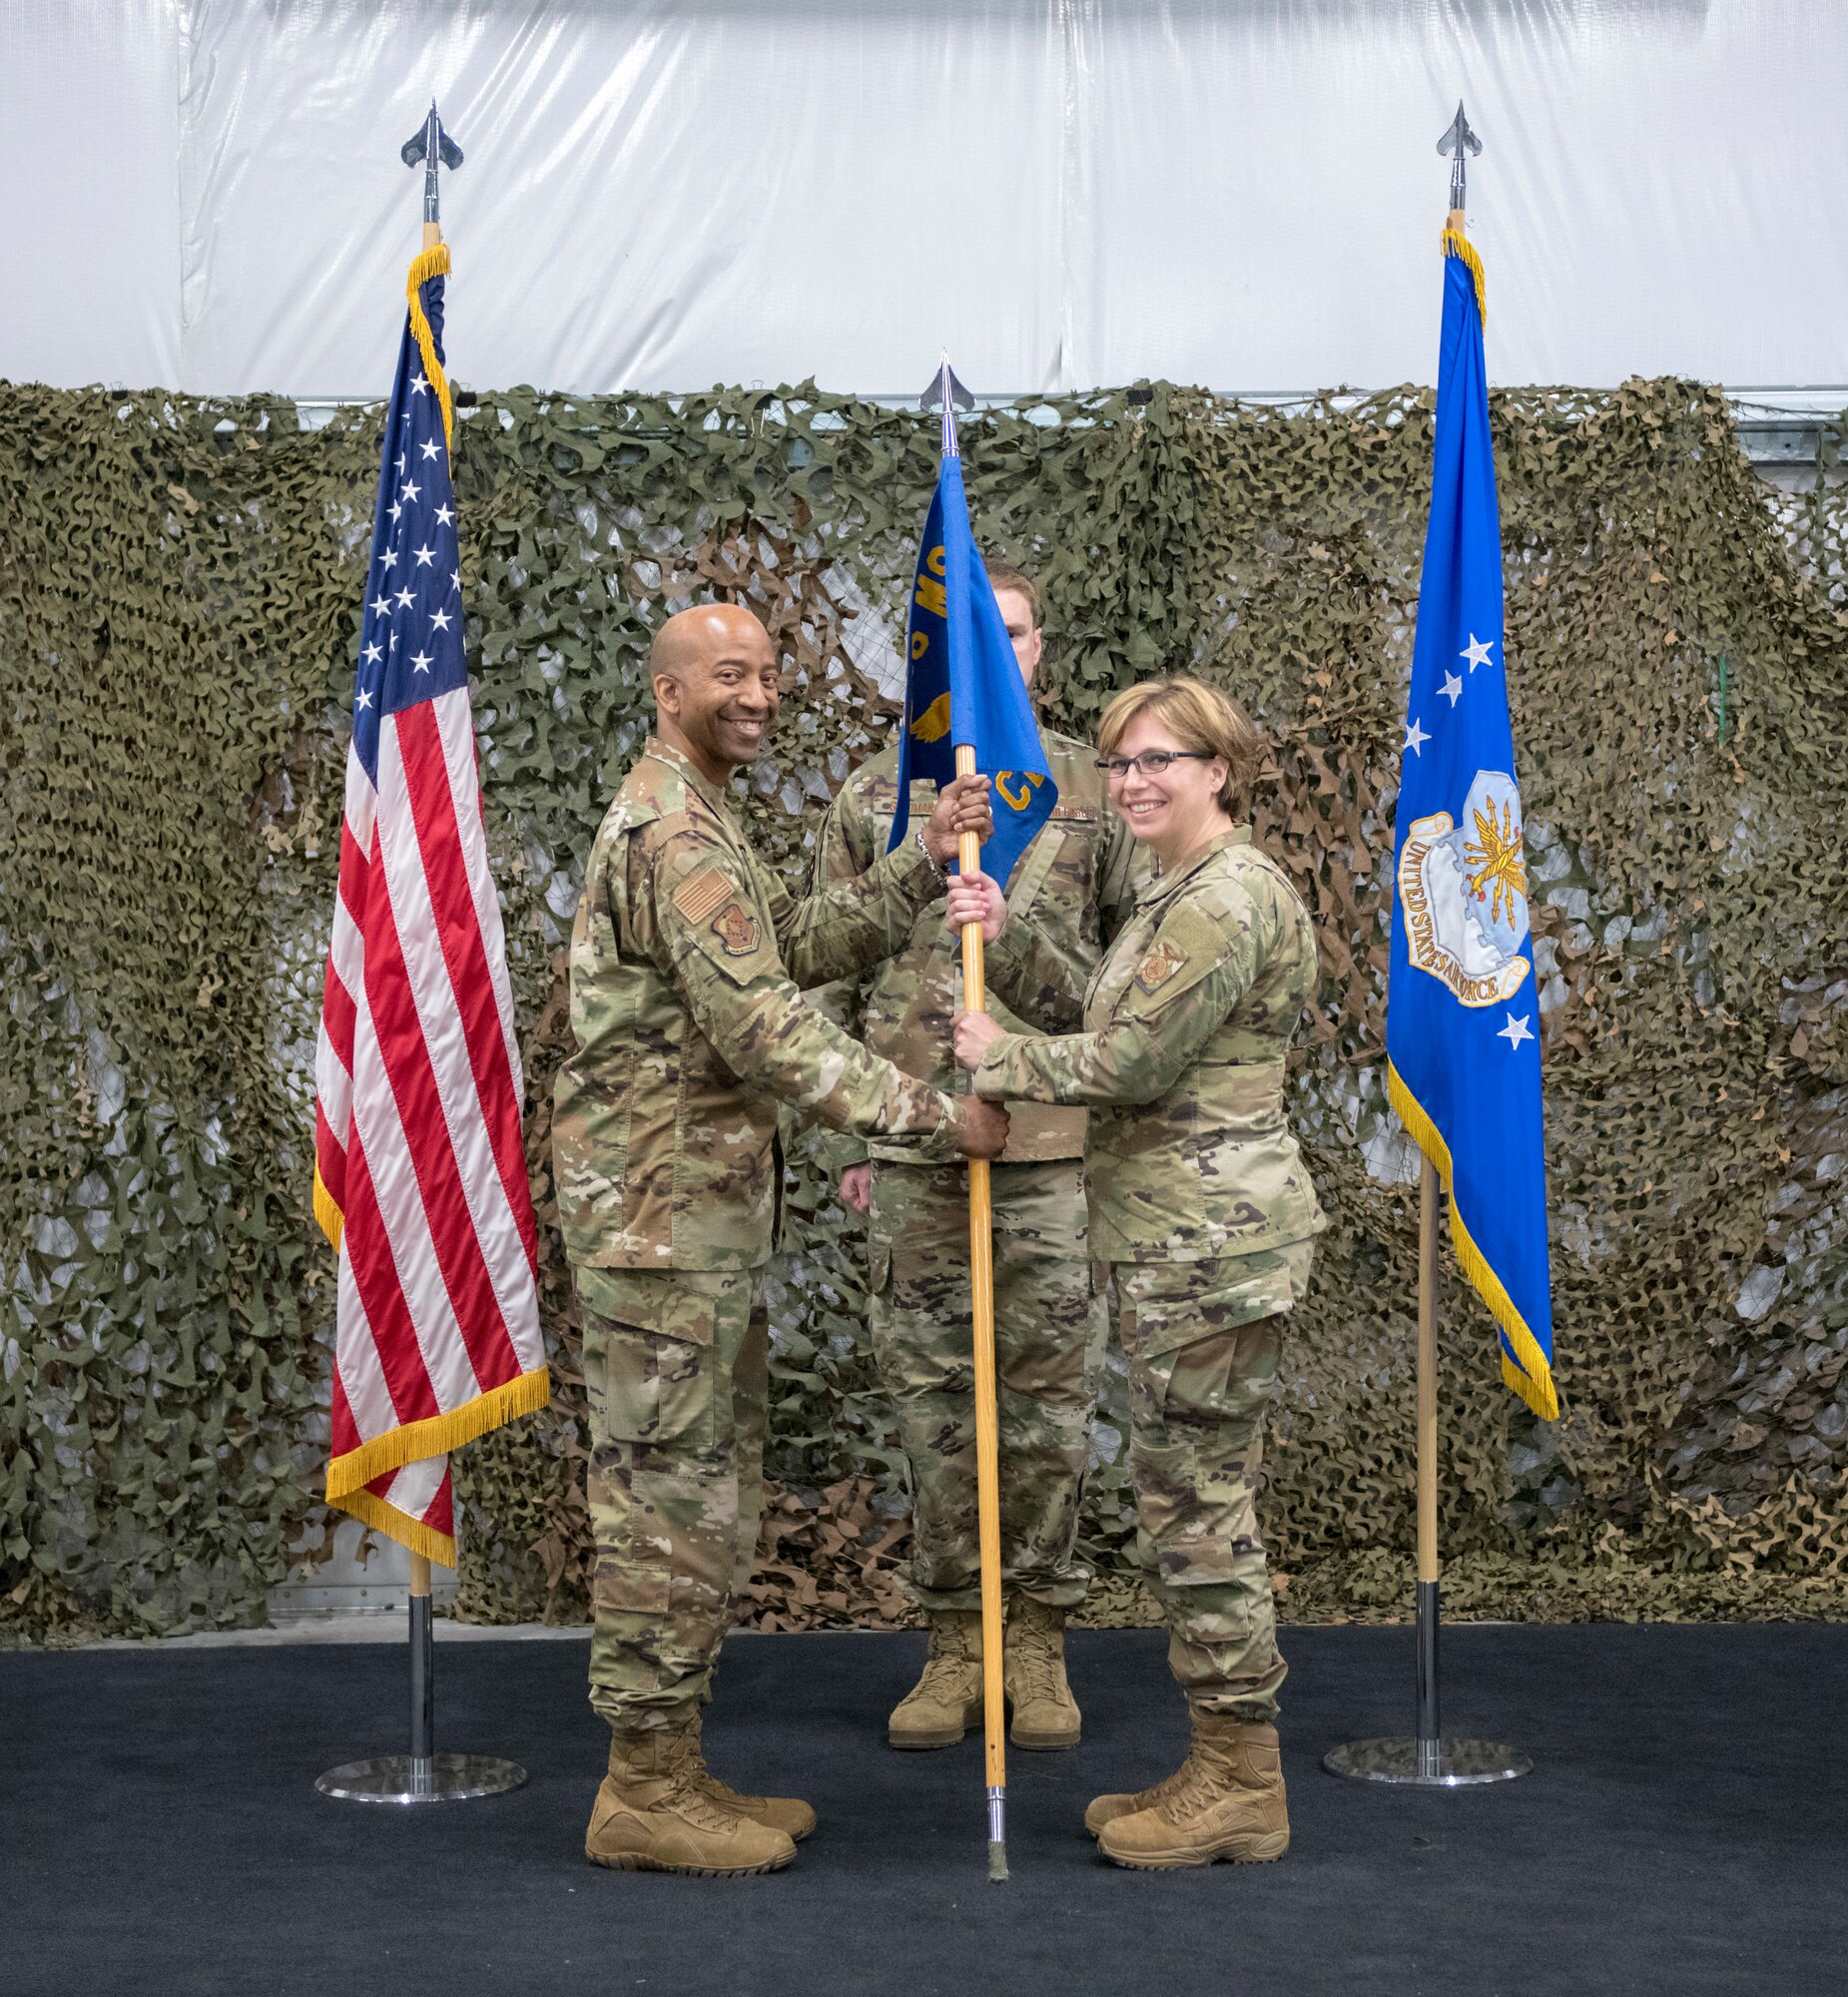 Col. Dorroh passes the 446th Civil Engineer Squadron guidon to Lt. Col. Hartman in operational camouflaged pattern uniforms in front of camo netting backdrop.